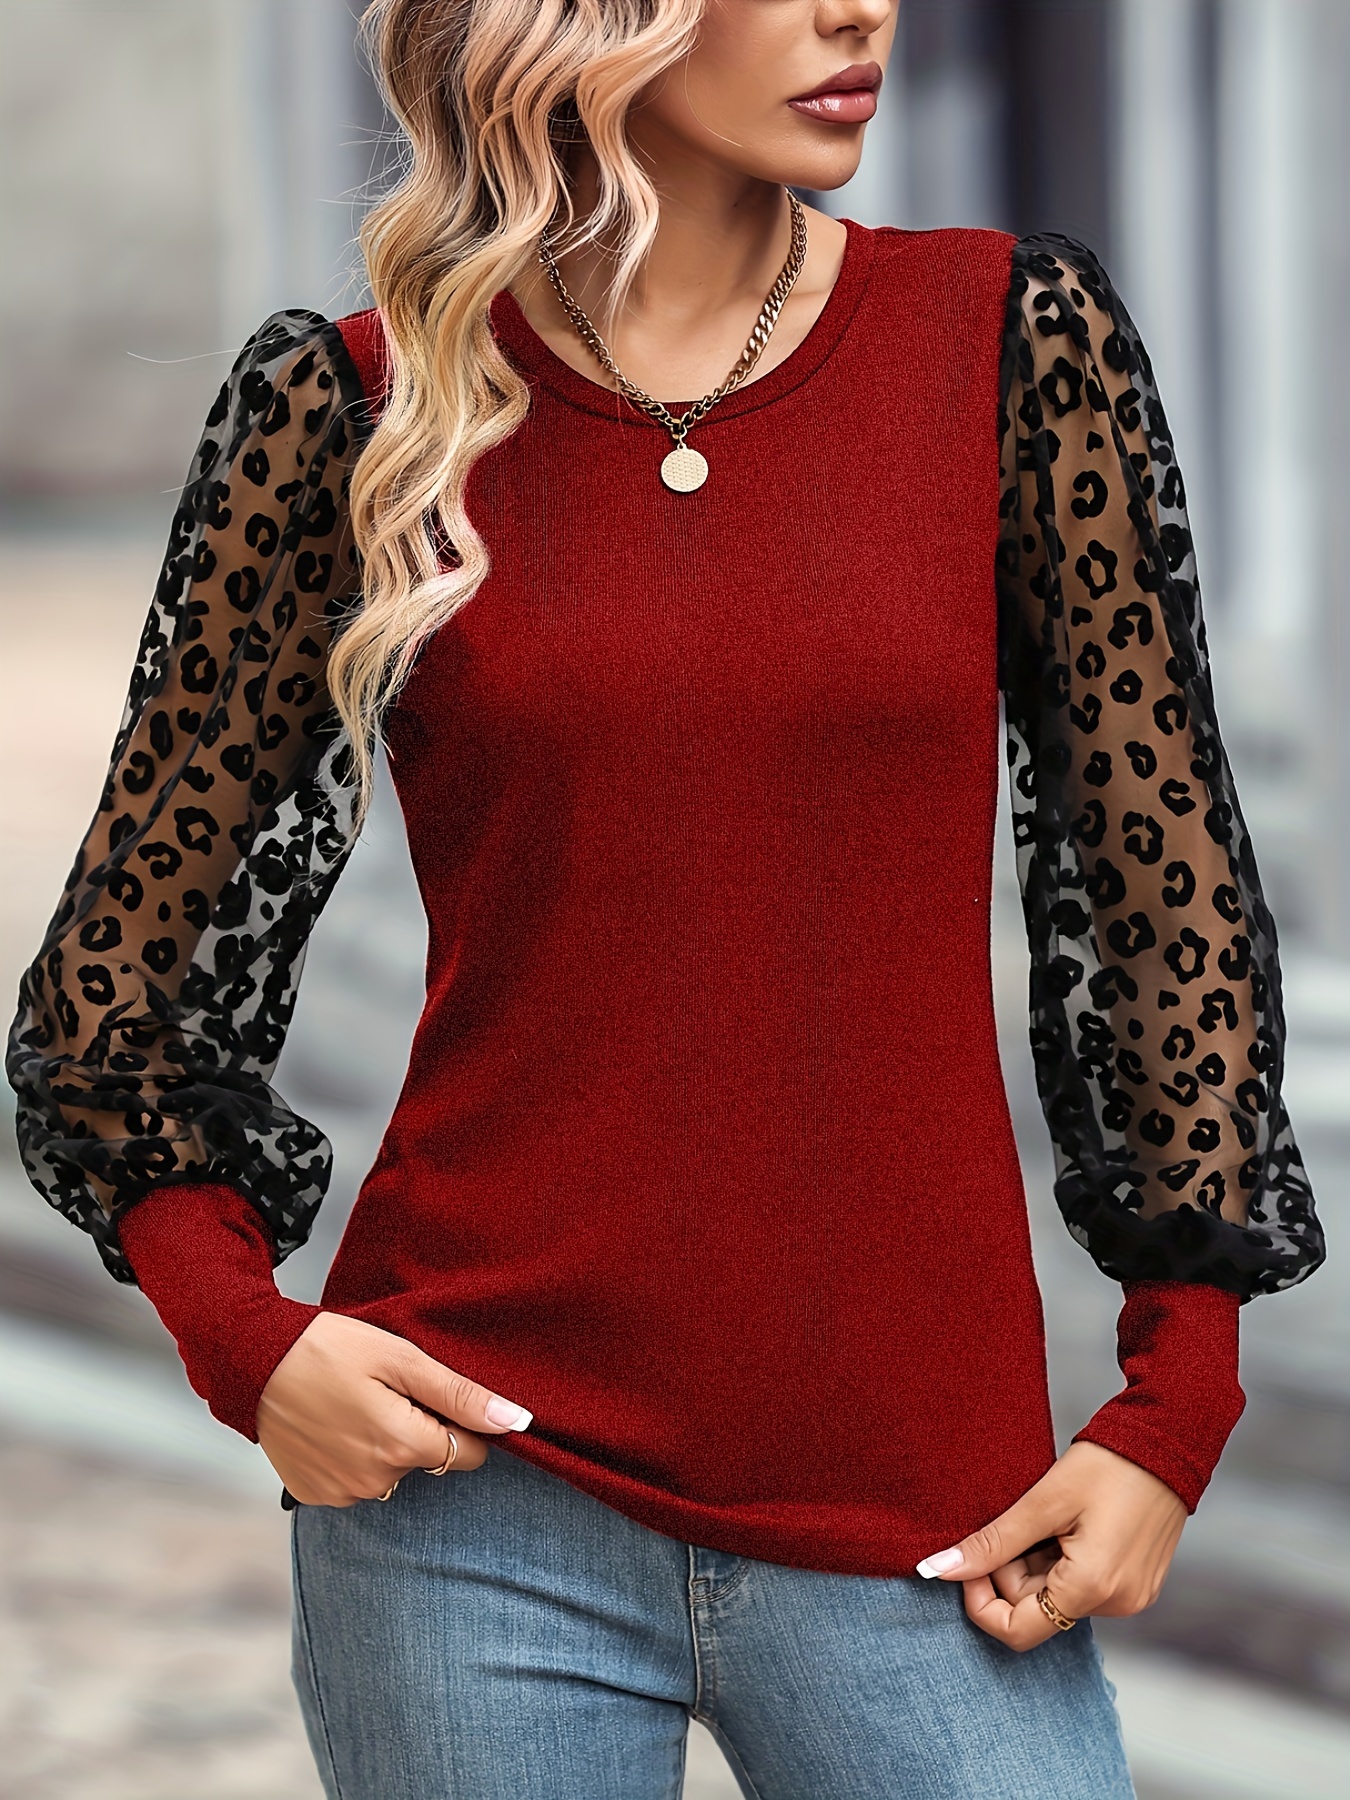 Solid Color Lace Patchwork Ballon Sleeve Ribbed Knit Tops, Elegant